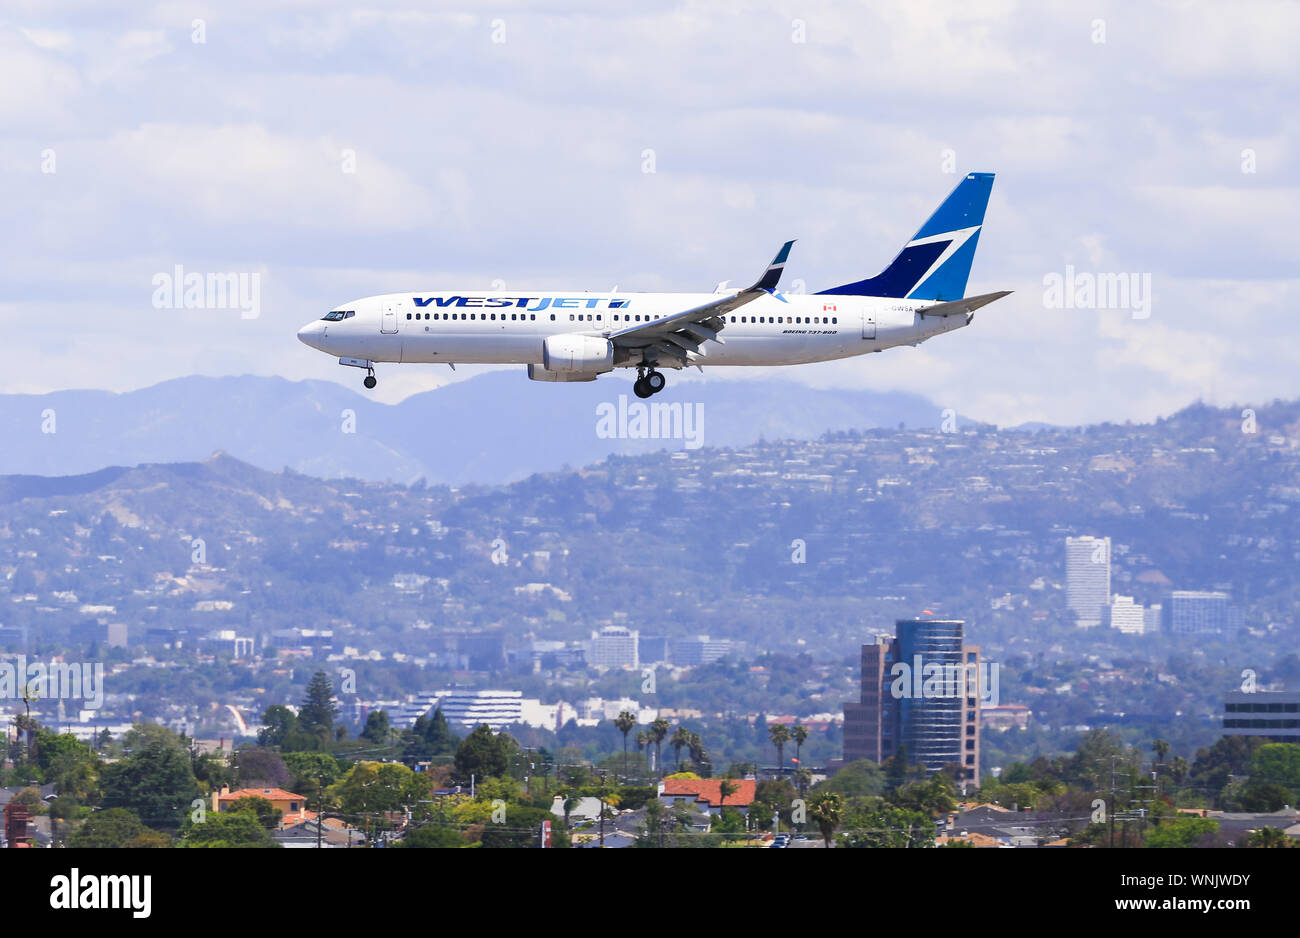 Los Angeles, California, USA - May 22, 2019: A WestJet Boeing 737 lands at the Los Angeles International Airport (LAX). In the background you can see Stock Photo